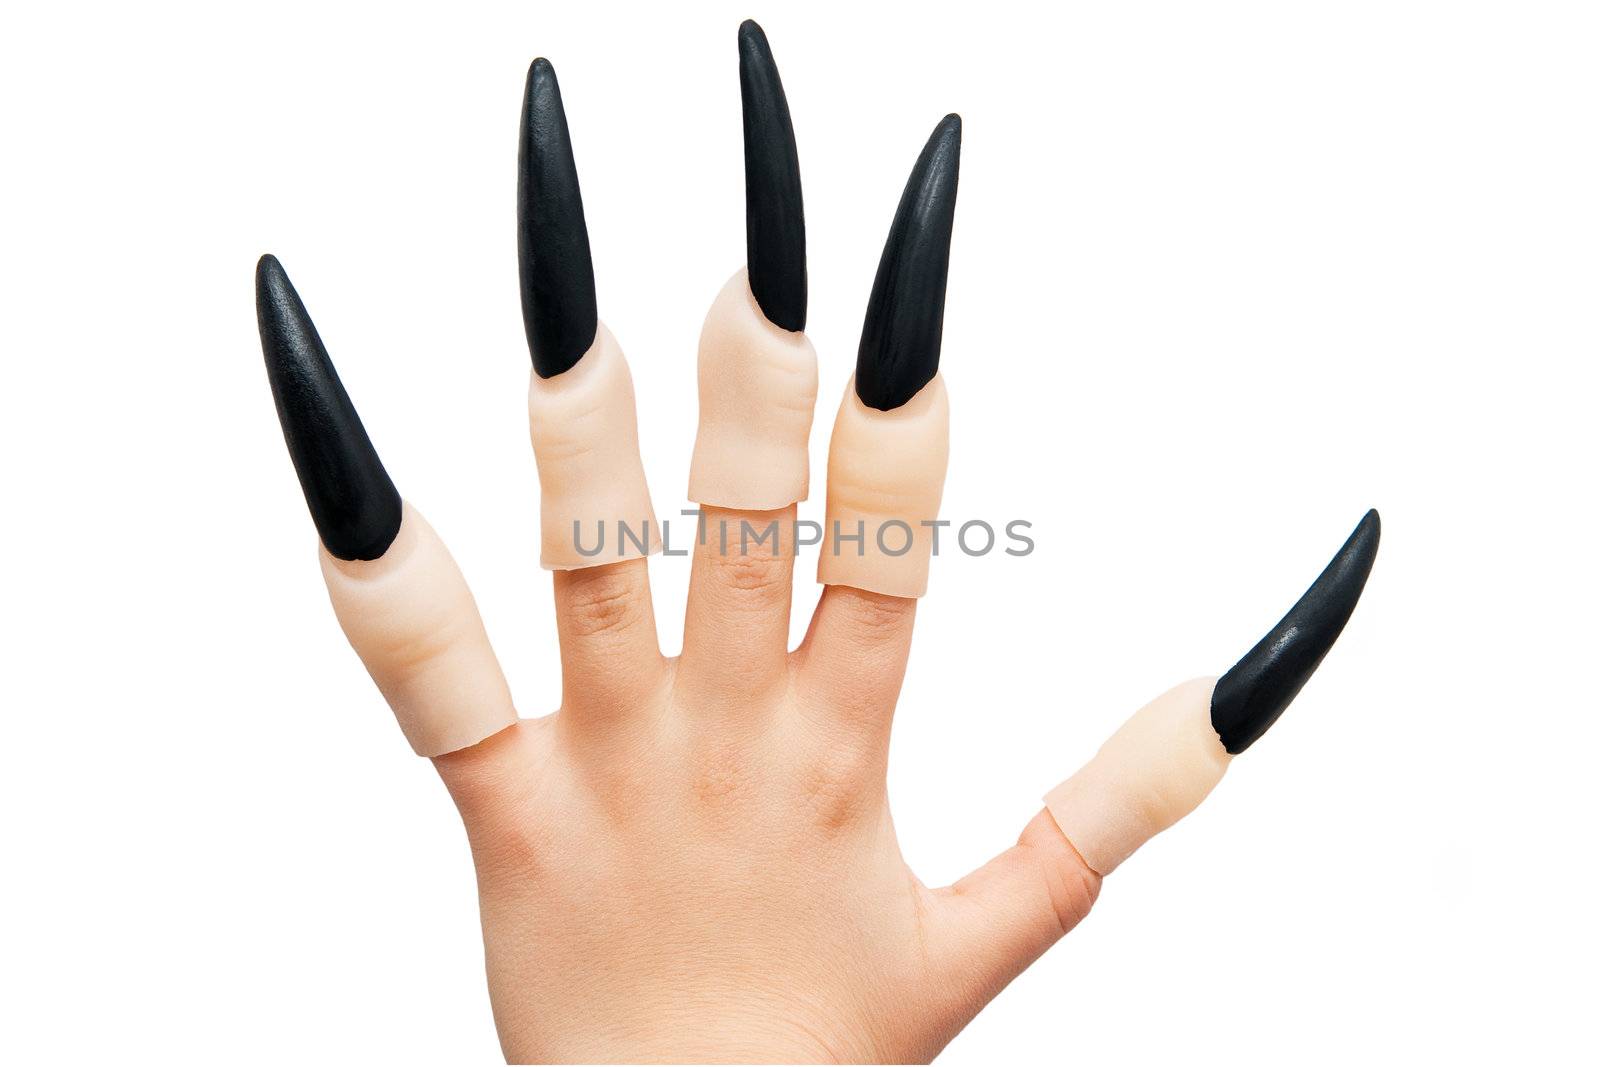 A hand with long black claws